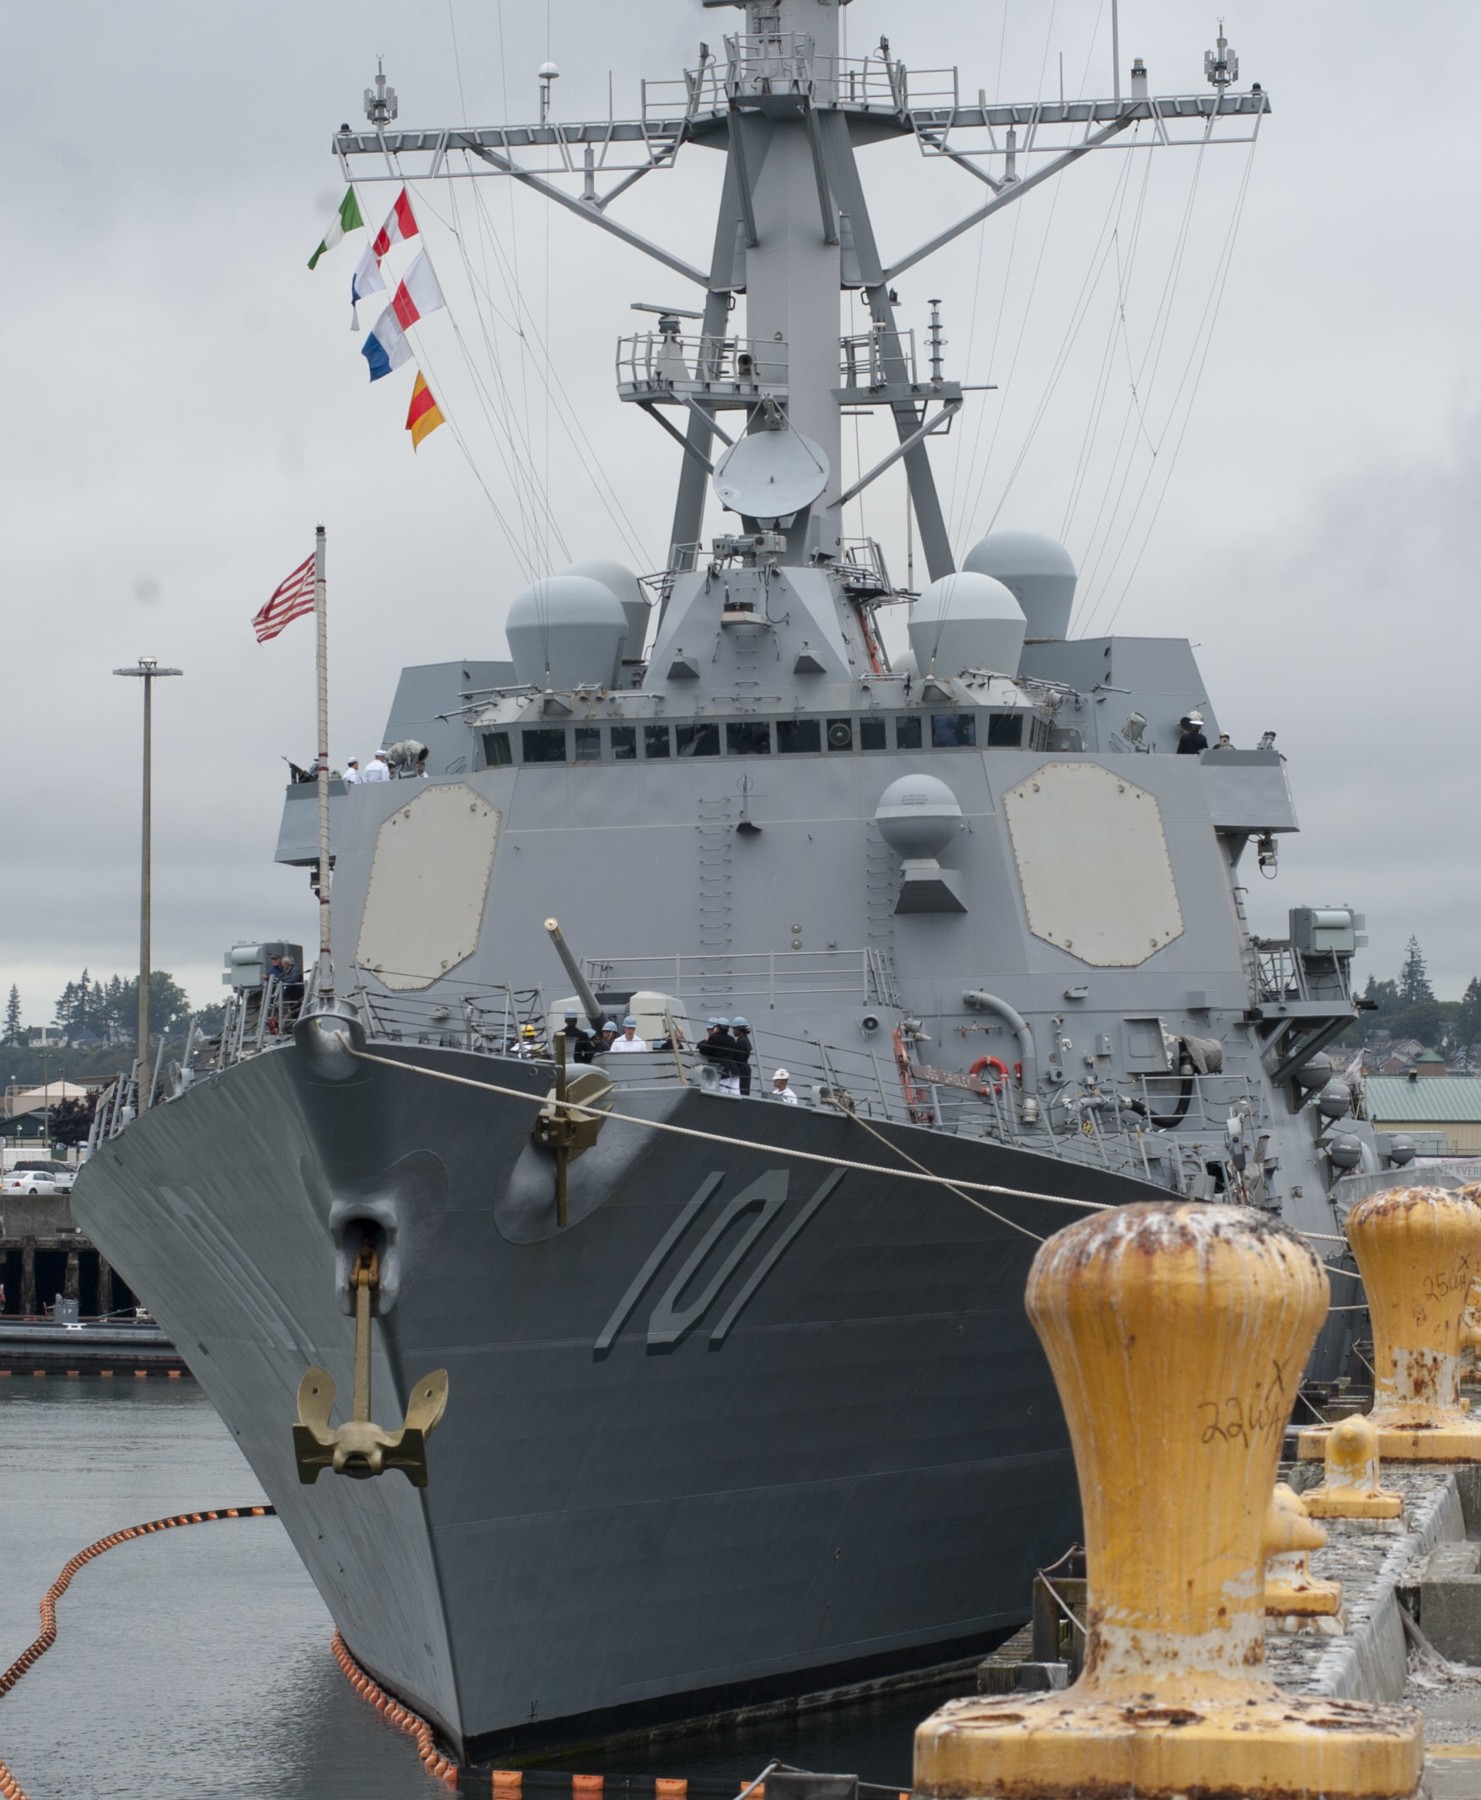 ddg-101 uss gridley arleigh burke class guided missile destroyer aegis us navy 03